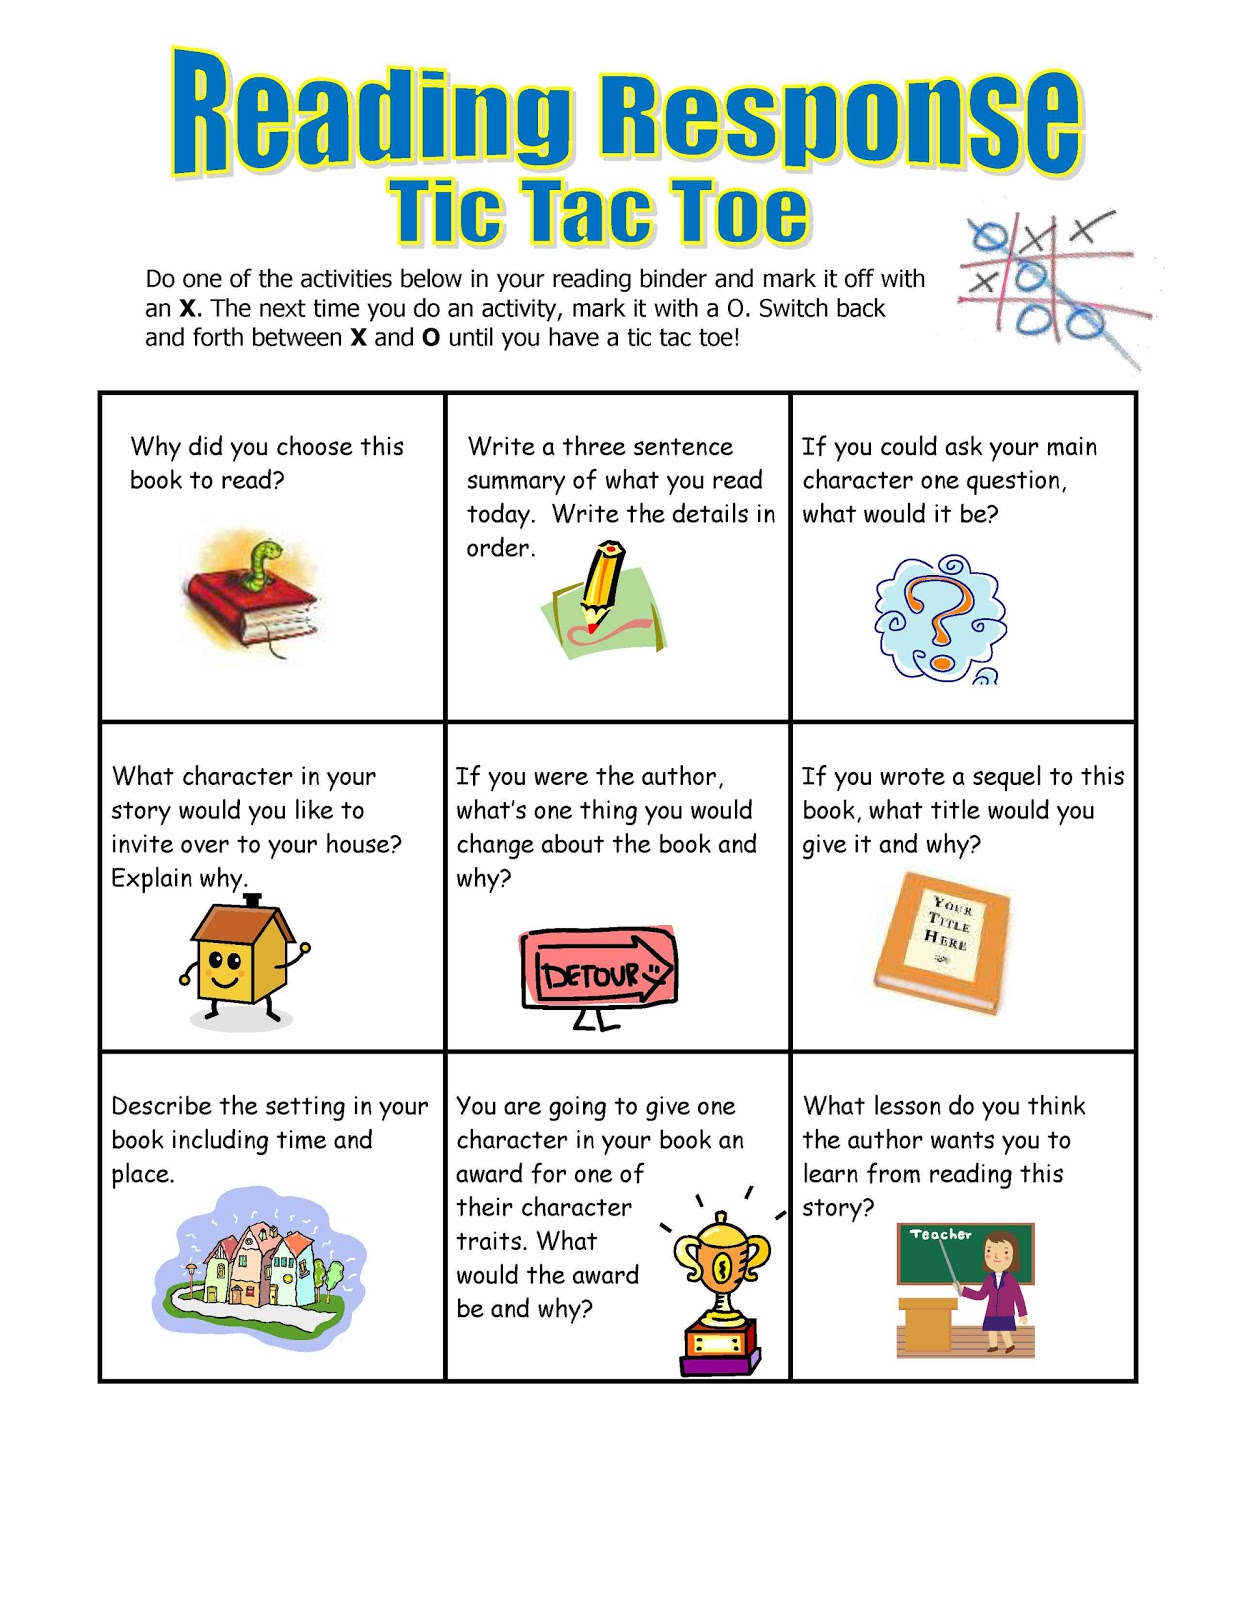 Tic-Tac-Toe in Differentiated Instruction